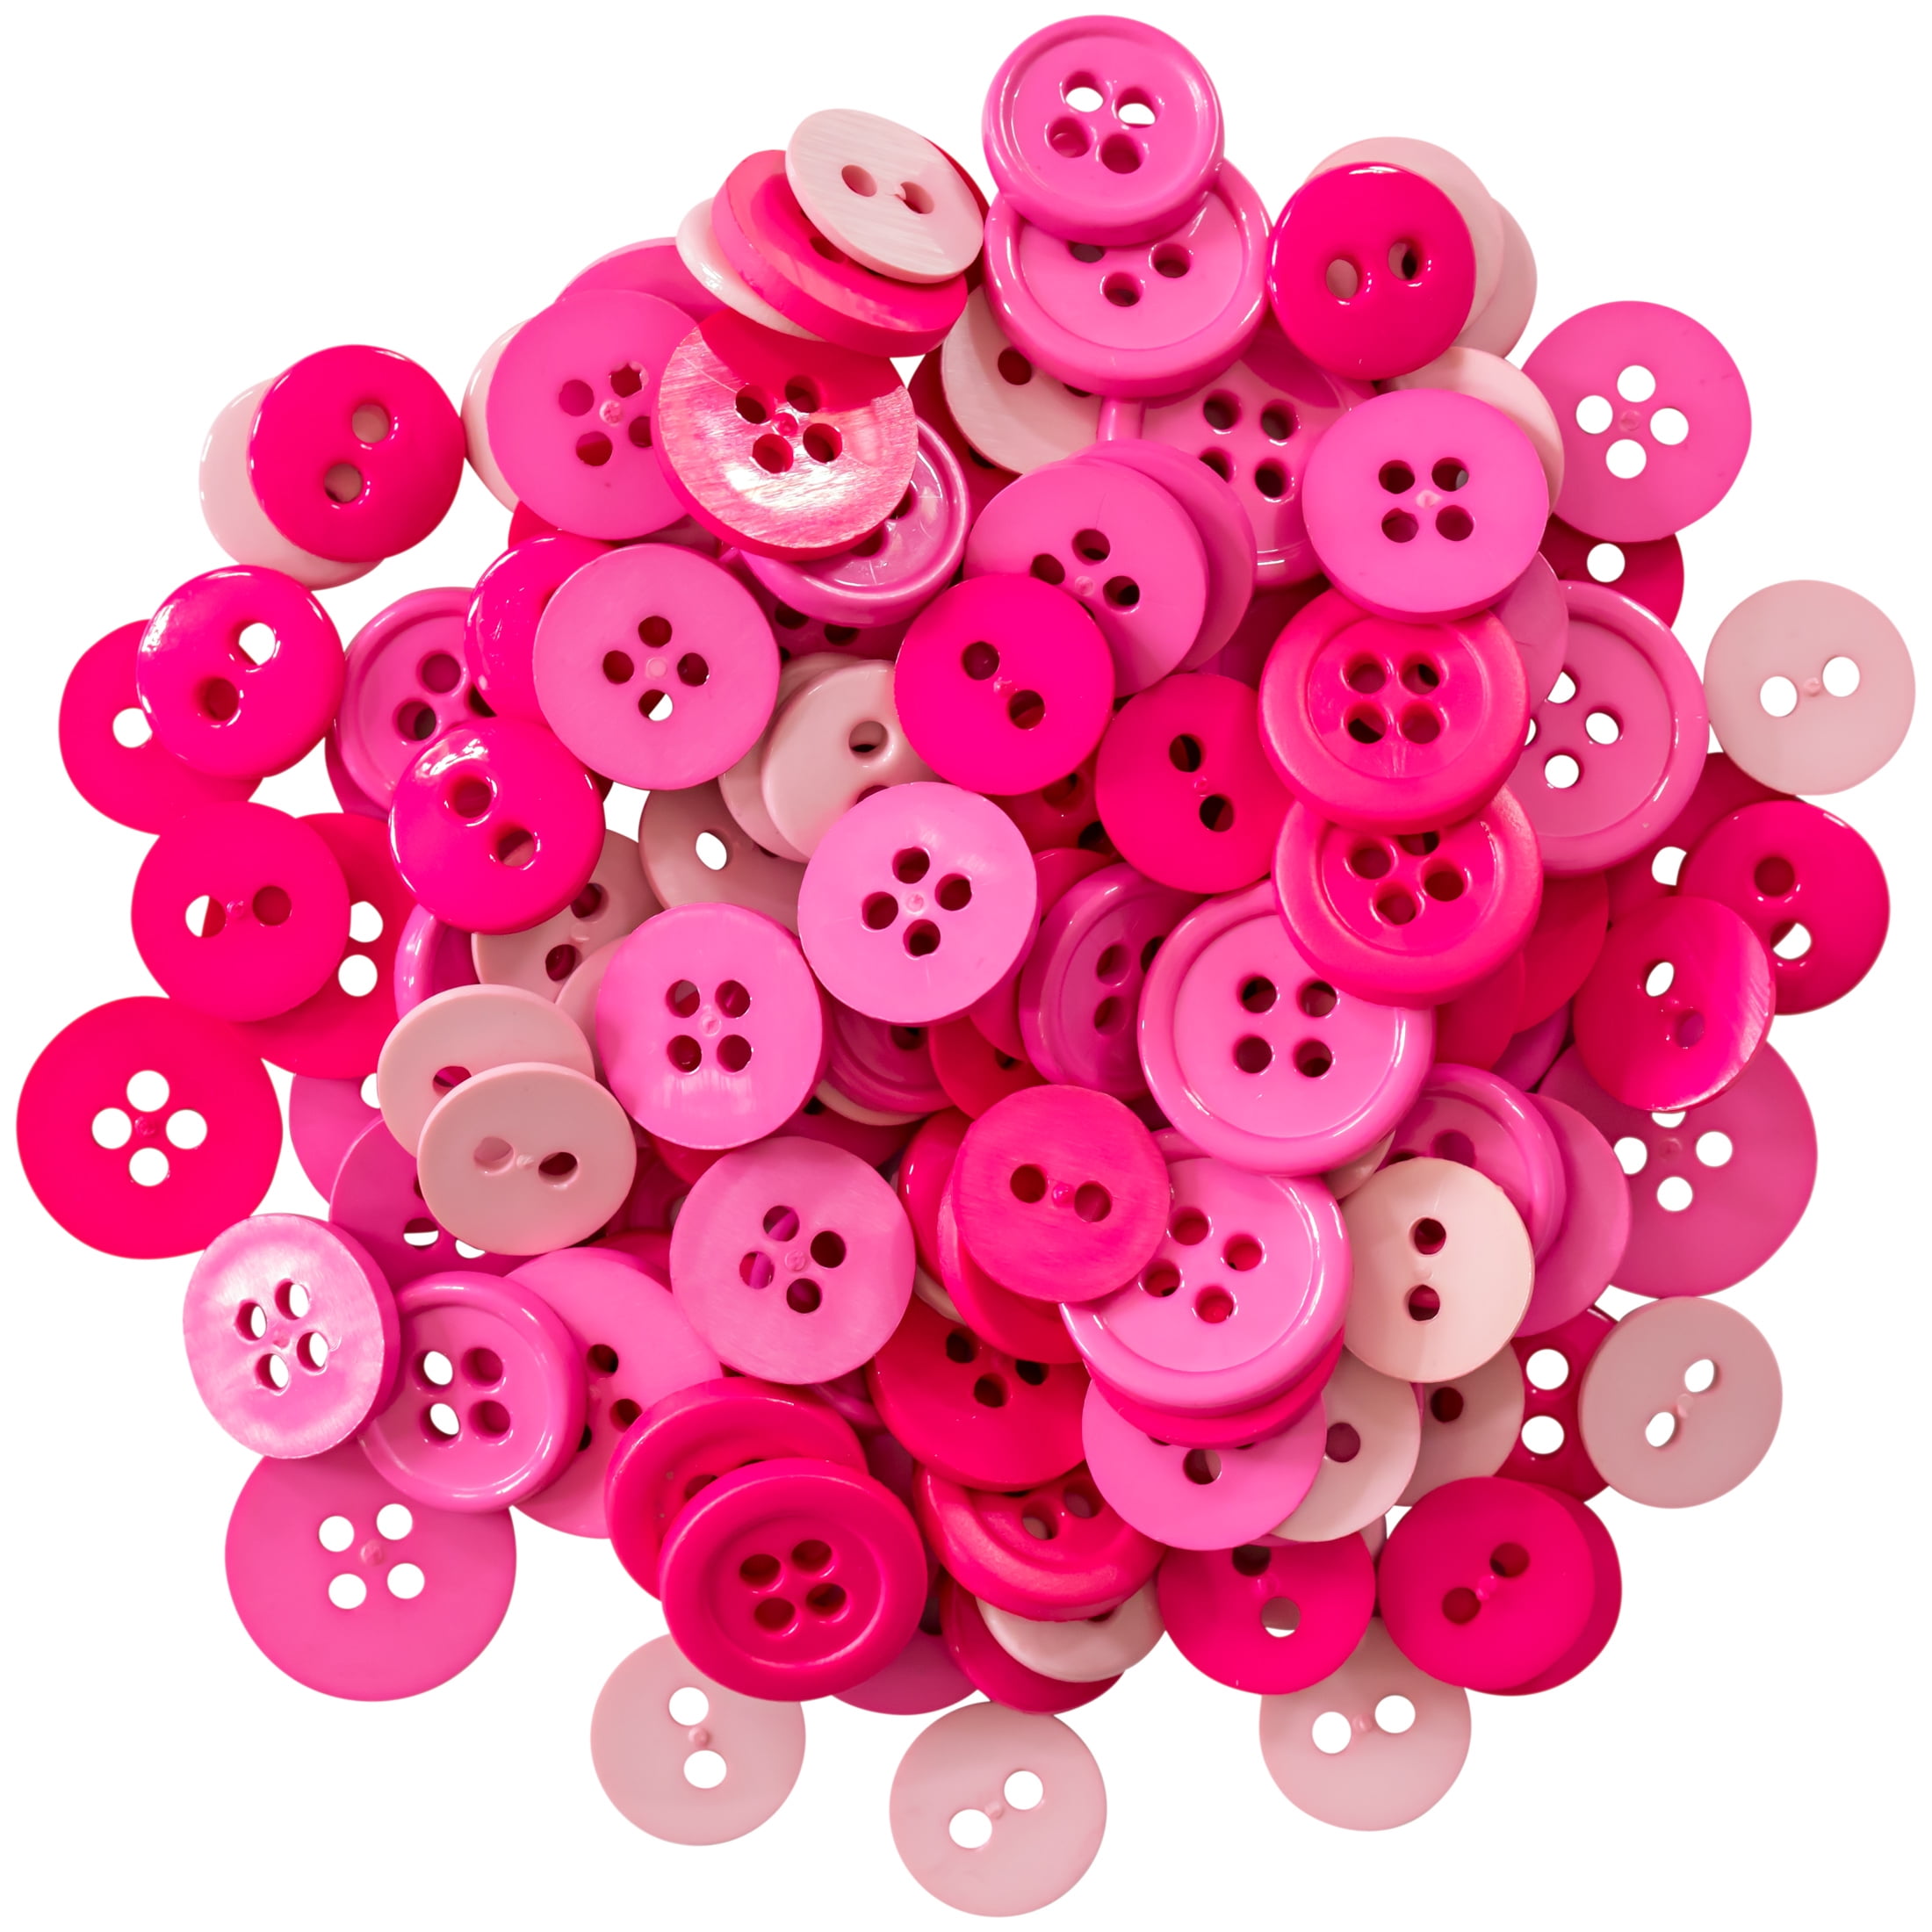 Sewing Buttons 4 Hole Sport Button Round Buttons Blouse Buttons Pants Button 0.40 inch Plastic Button Crafts Button Pink Button 16L Pack of 12